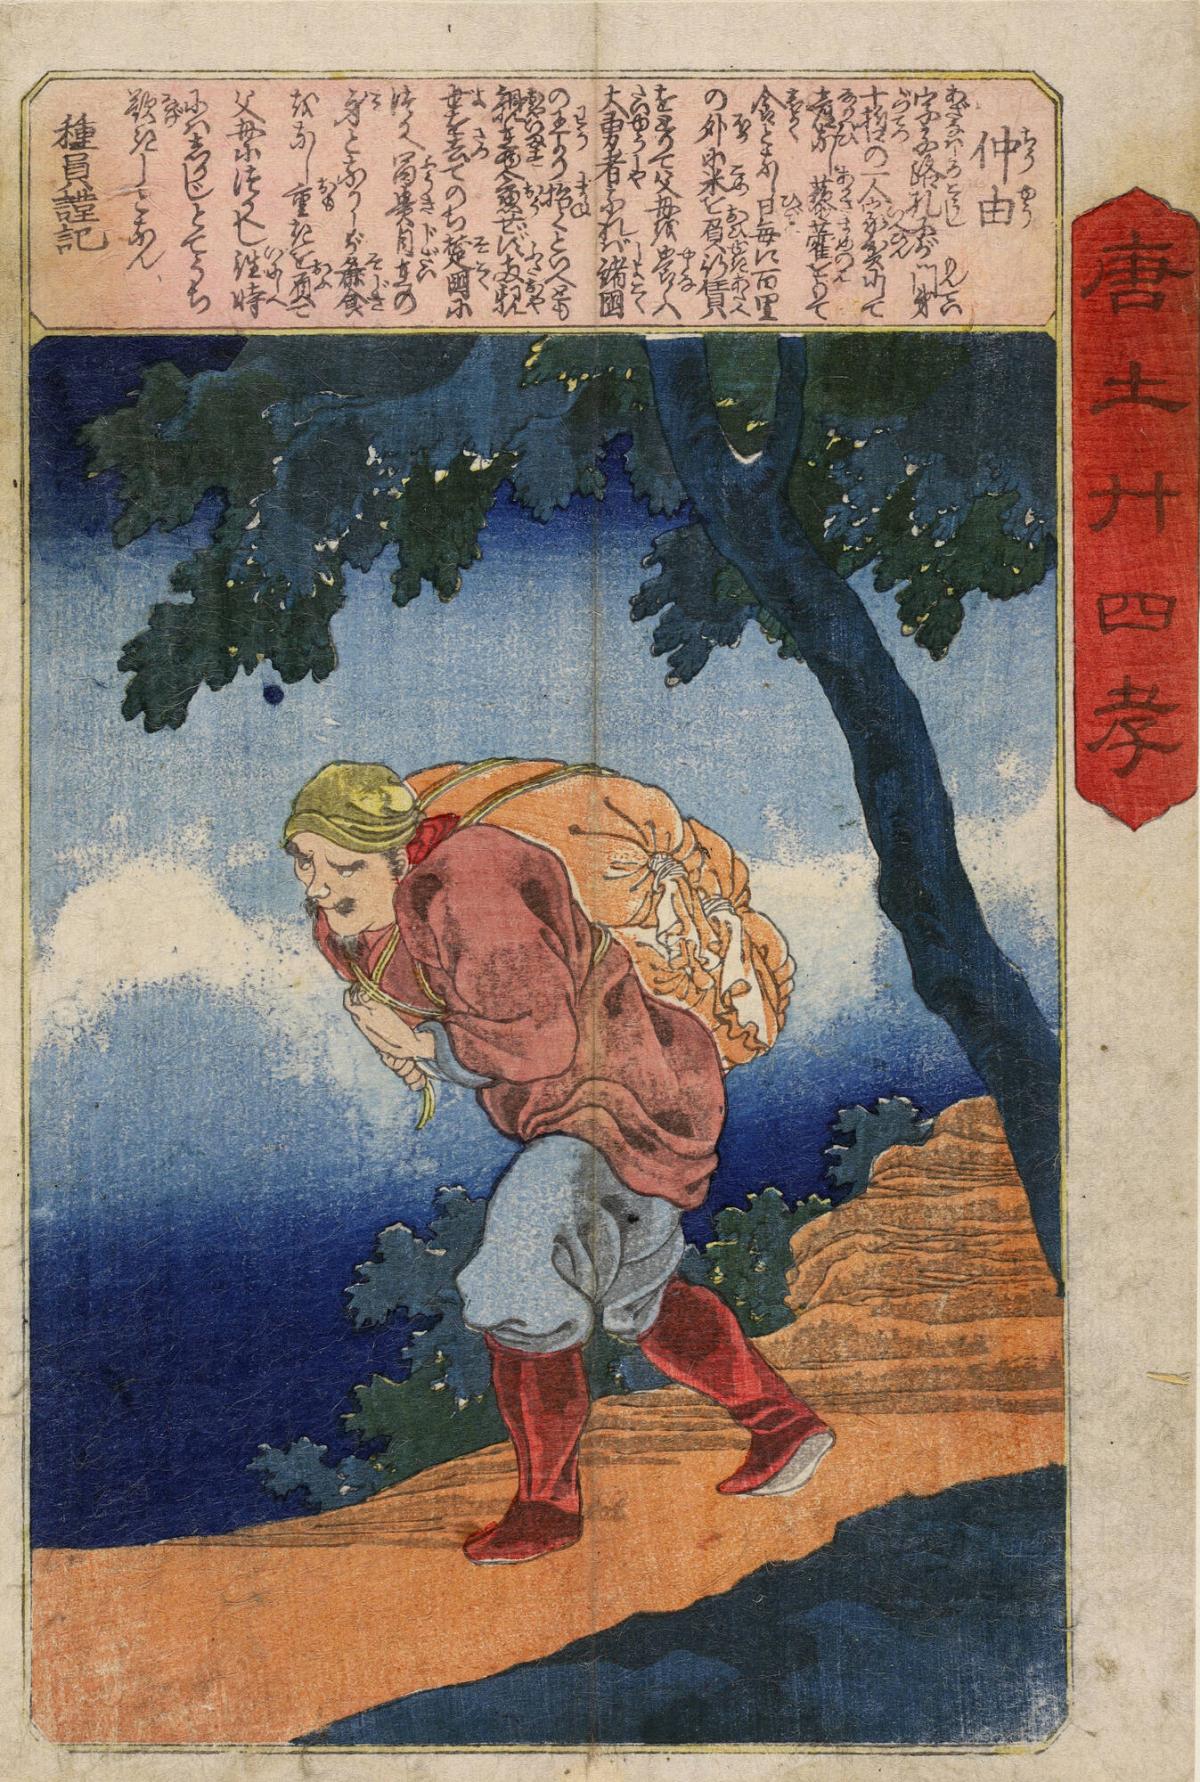 Zhong You (Chuyu) Carrying Sacks, from the series The Twenty-four Chinese Paragons of Filial Piety